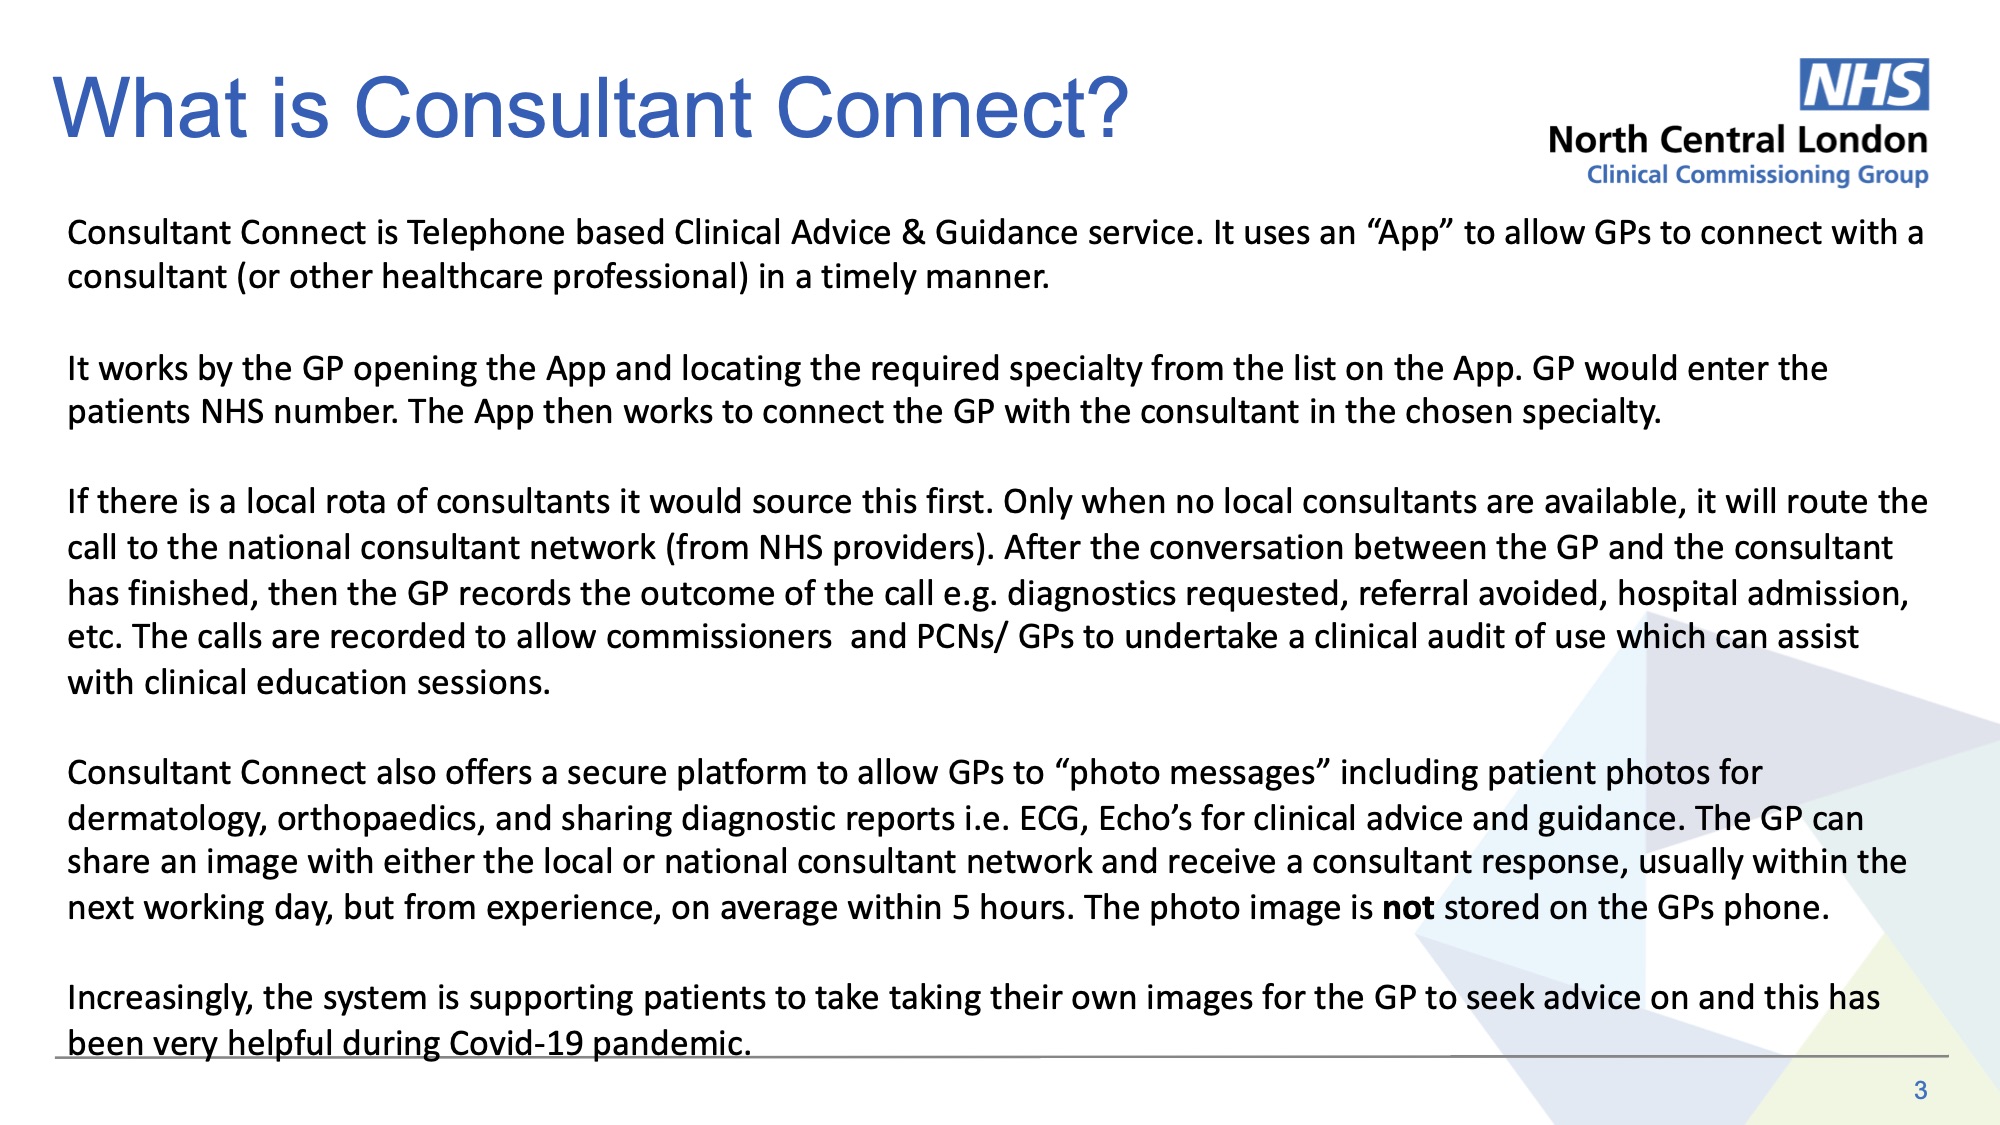 - Consultant Connect